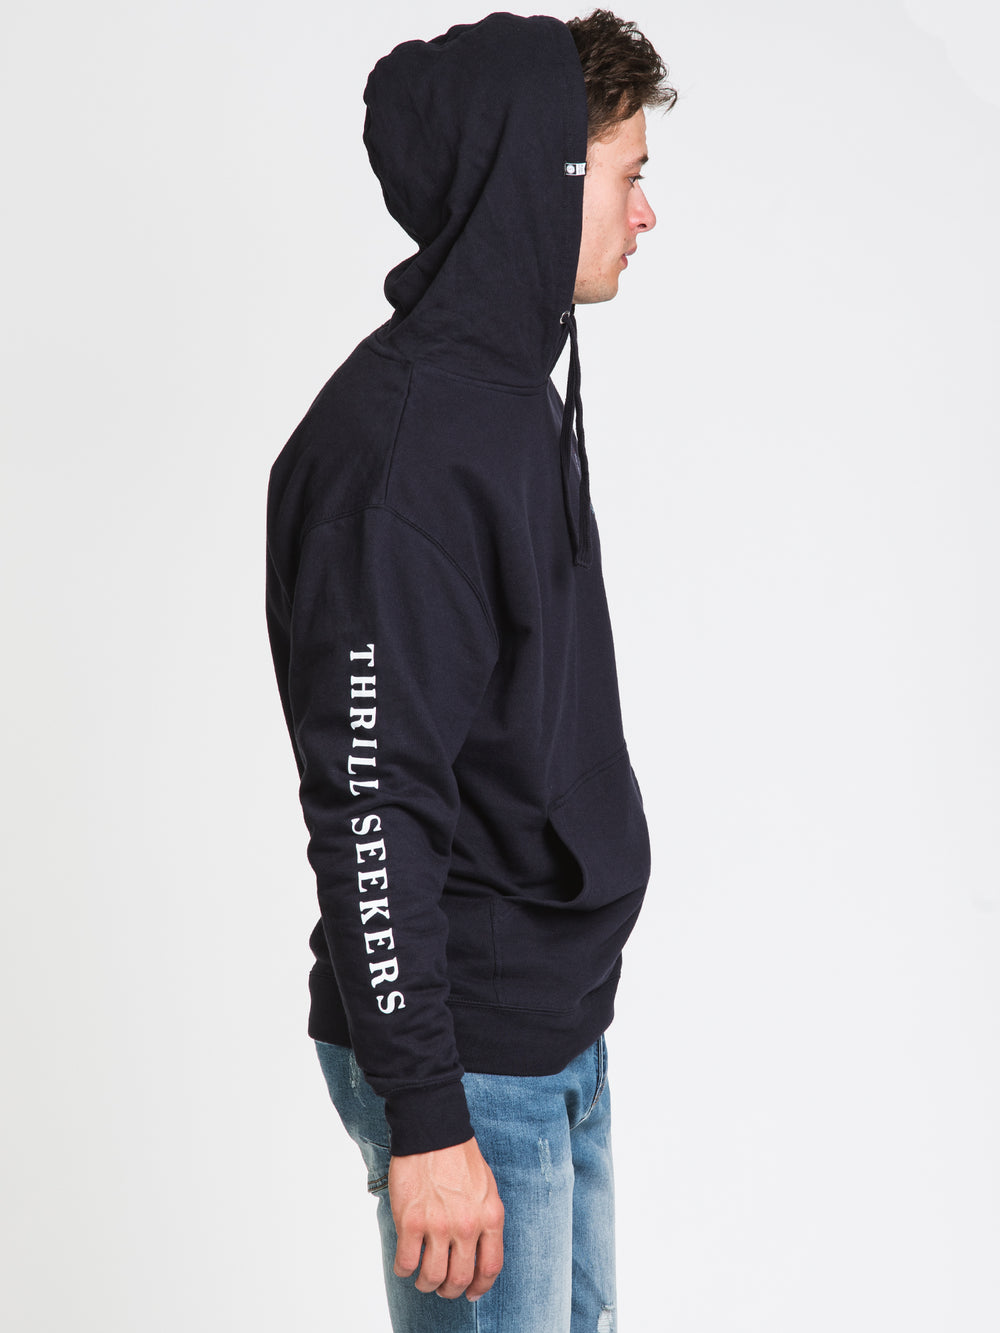 SALTY CREW BOTTOM FEEDER PULLOVER HOODIE  - CLEARANCE